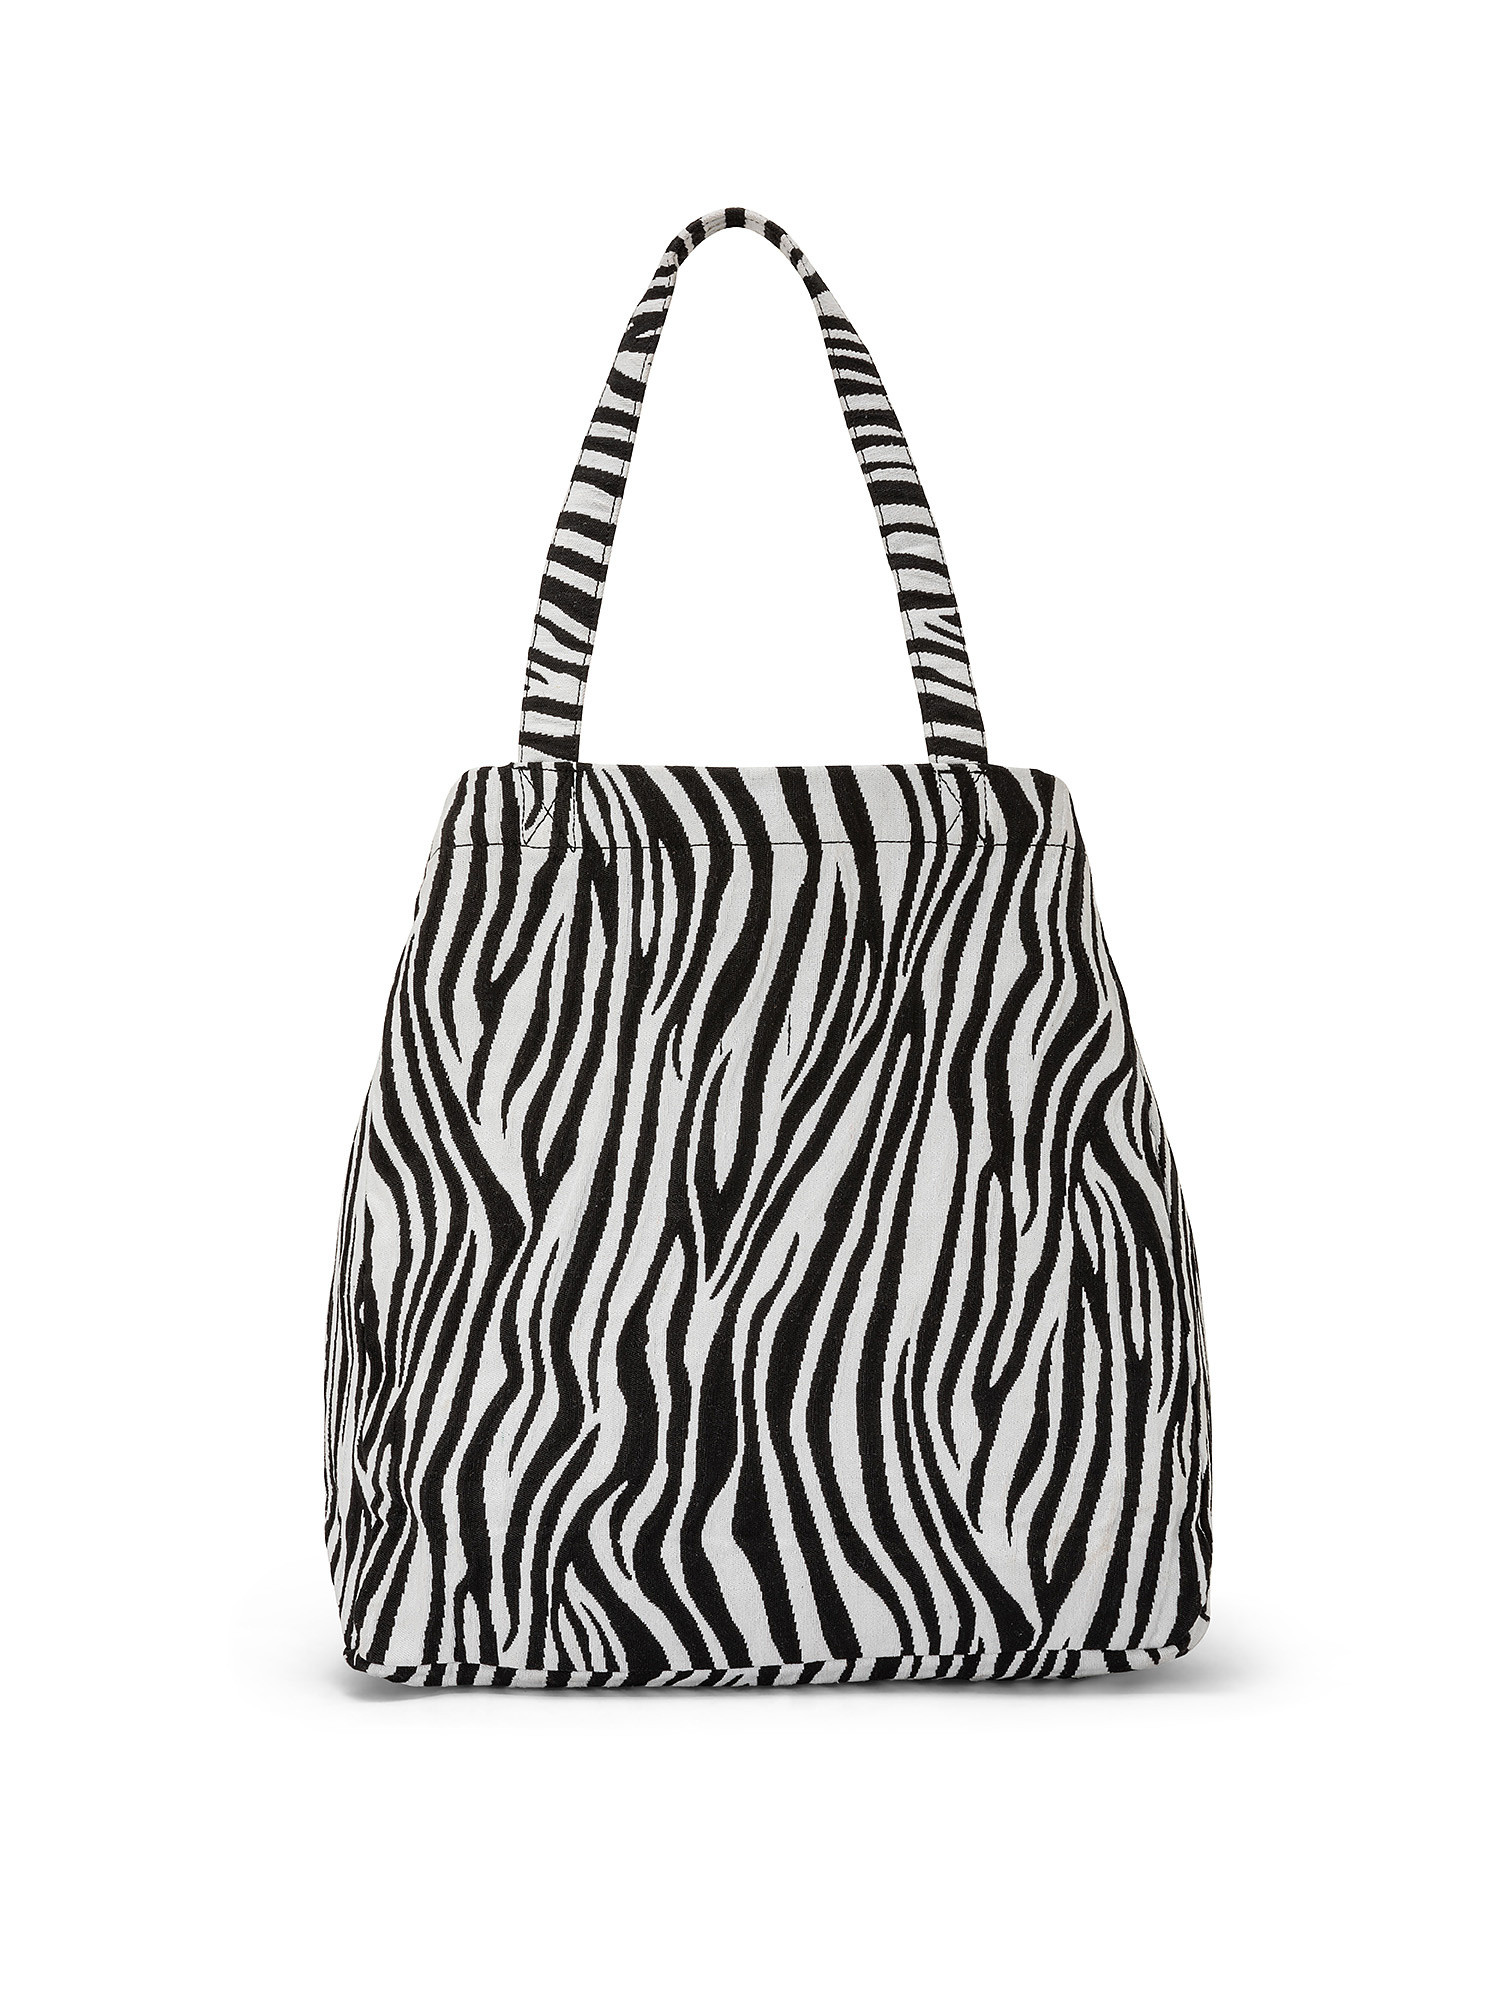 Shopping bag con stampa a zebrata, Animalier, large image number 0